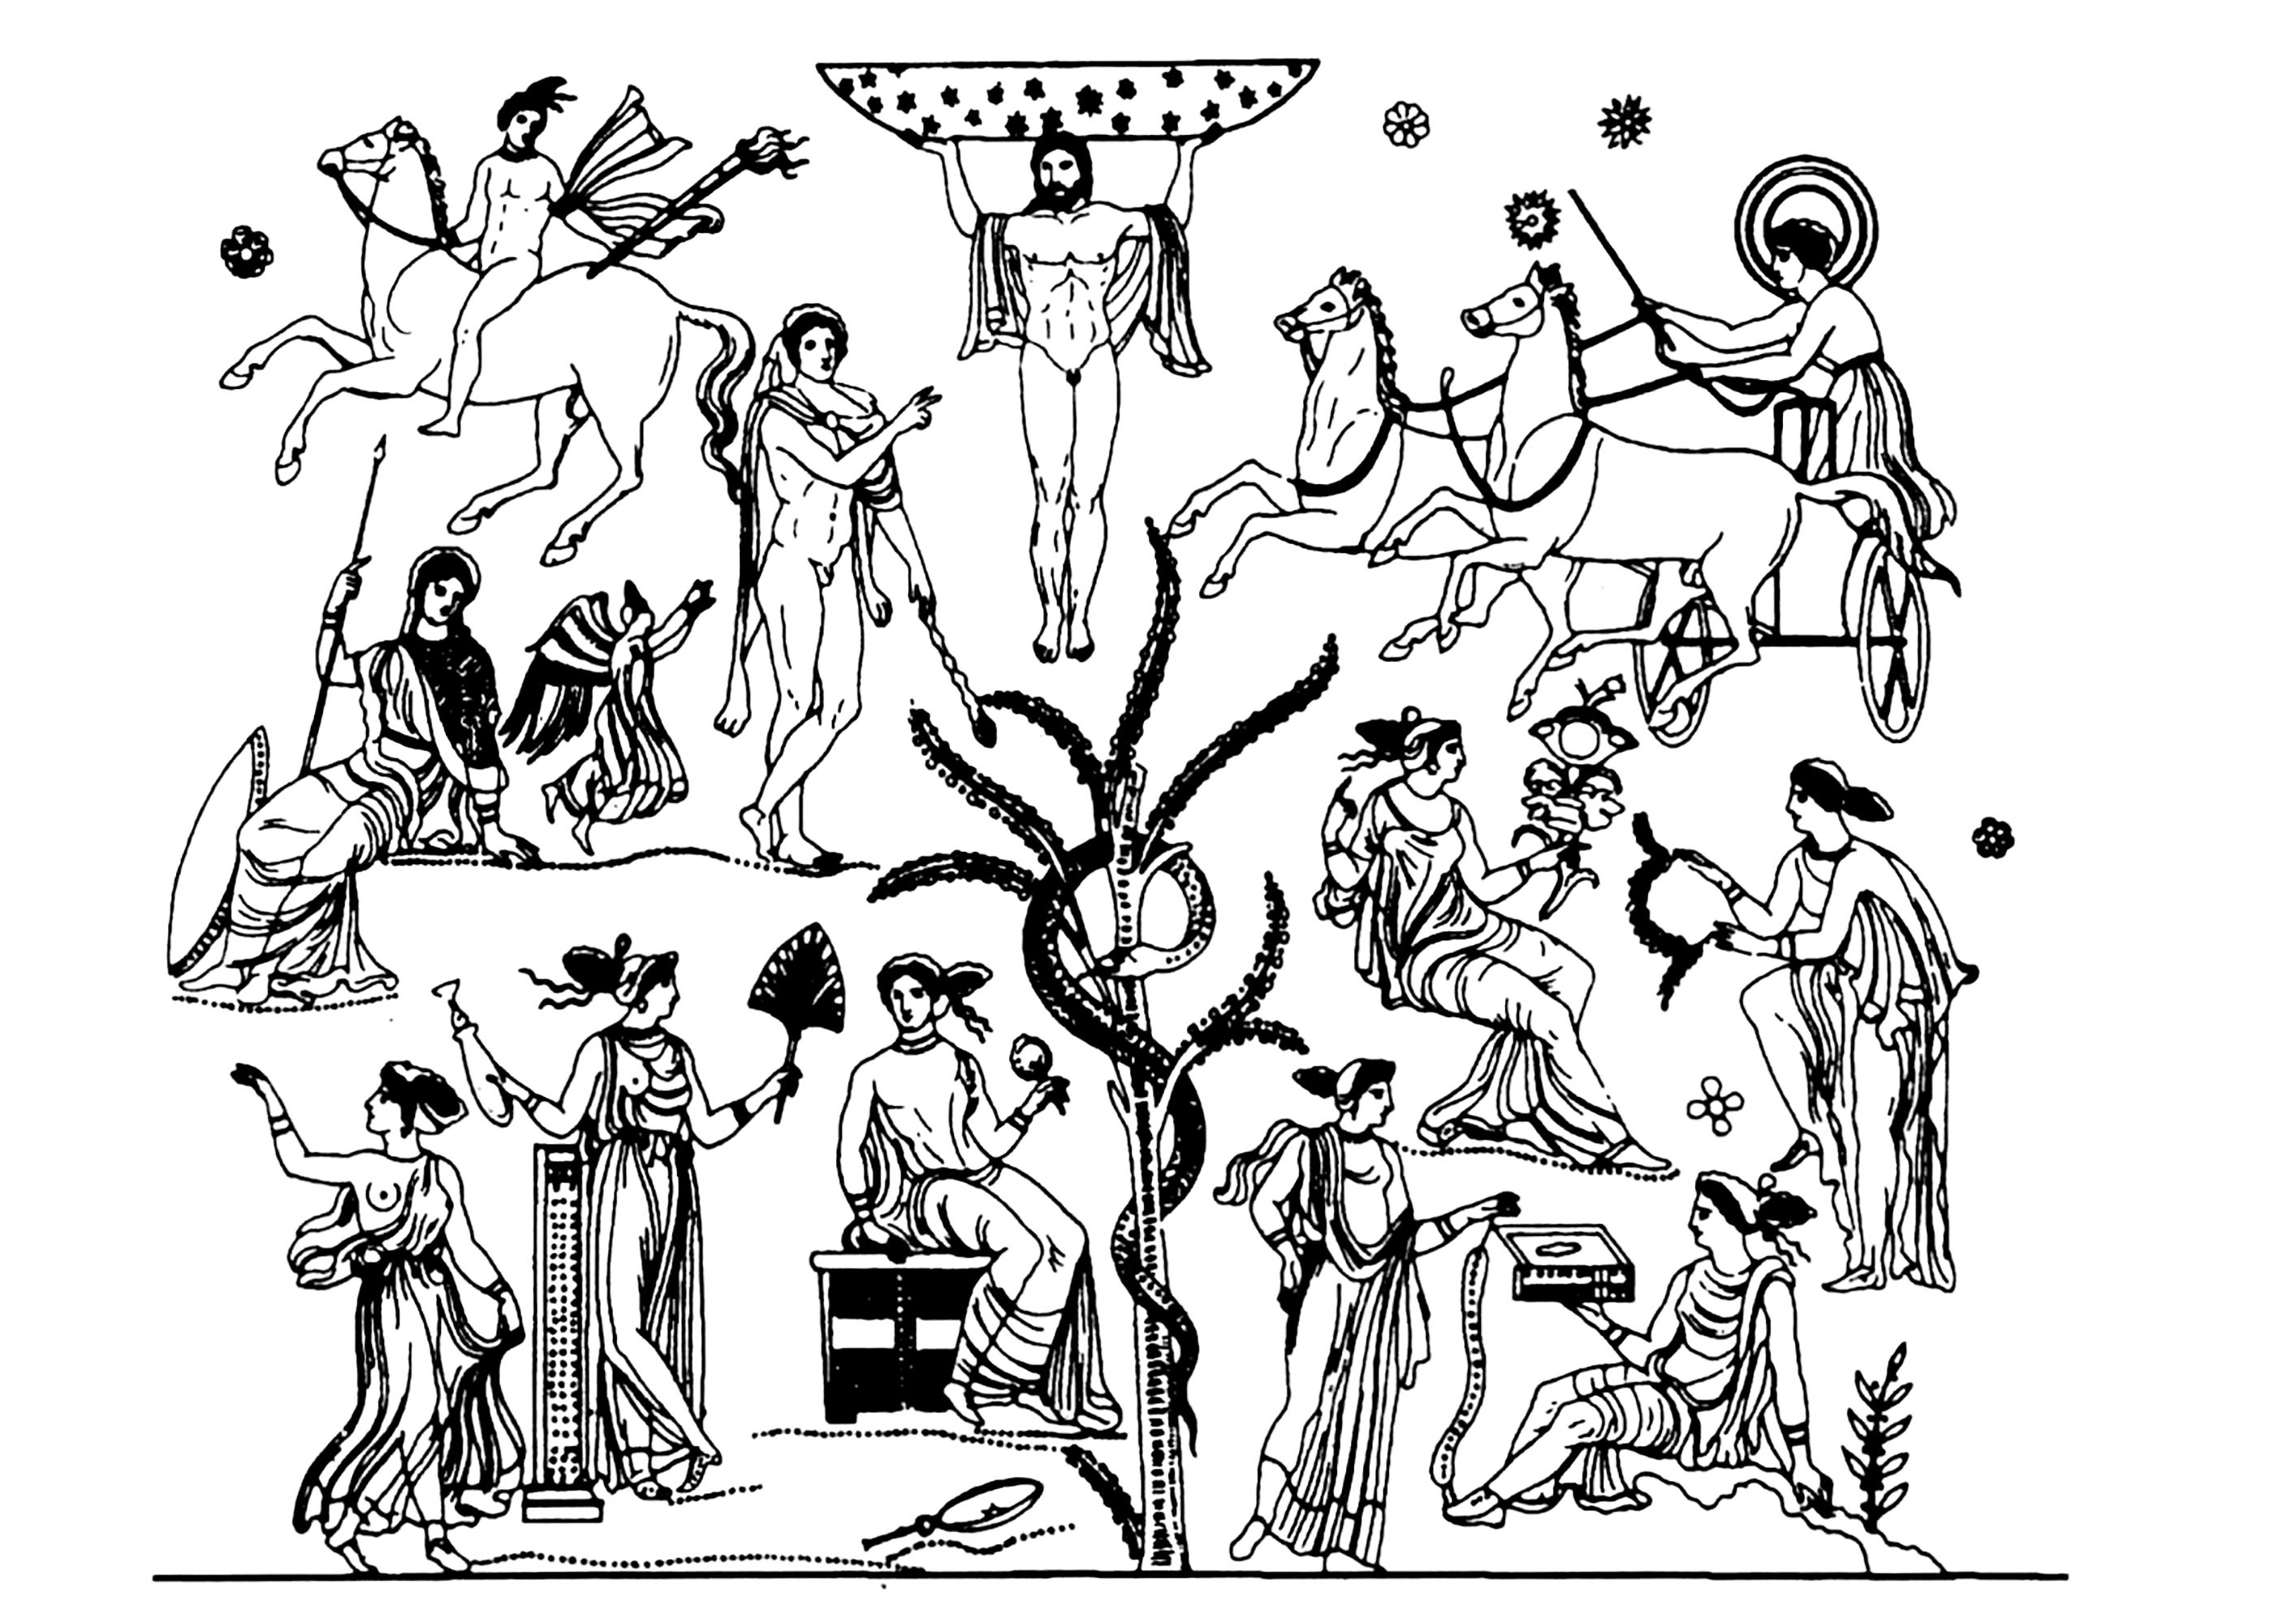 Heroes and heroines of Greek mythology. Axial representation of Atlas and the tree in the Garden of the Hesperides, vase dated between 340 and 320 B.C.It features Atlas, Hélois, Phosphoros, Nikè, Athéna, Phérécyde, Héraclès...